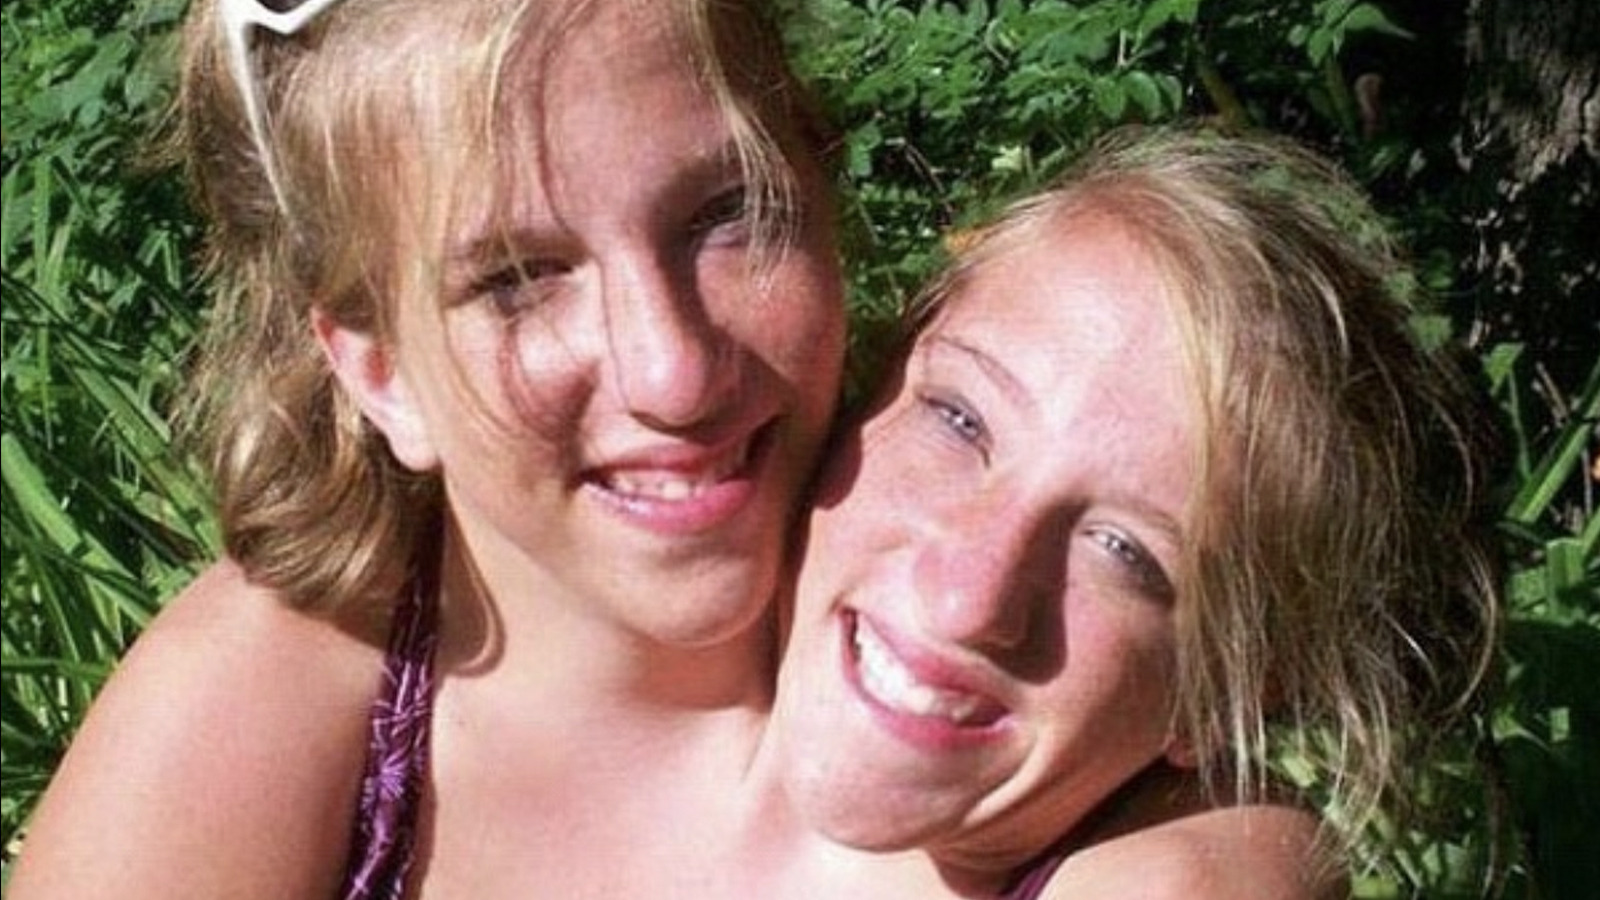 Where Are Conjoined Twins Abby And Brittany Hensel Now?